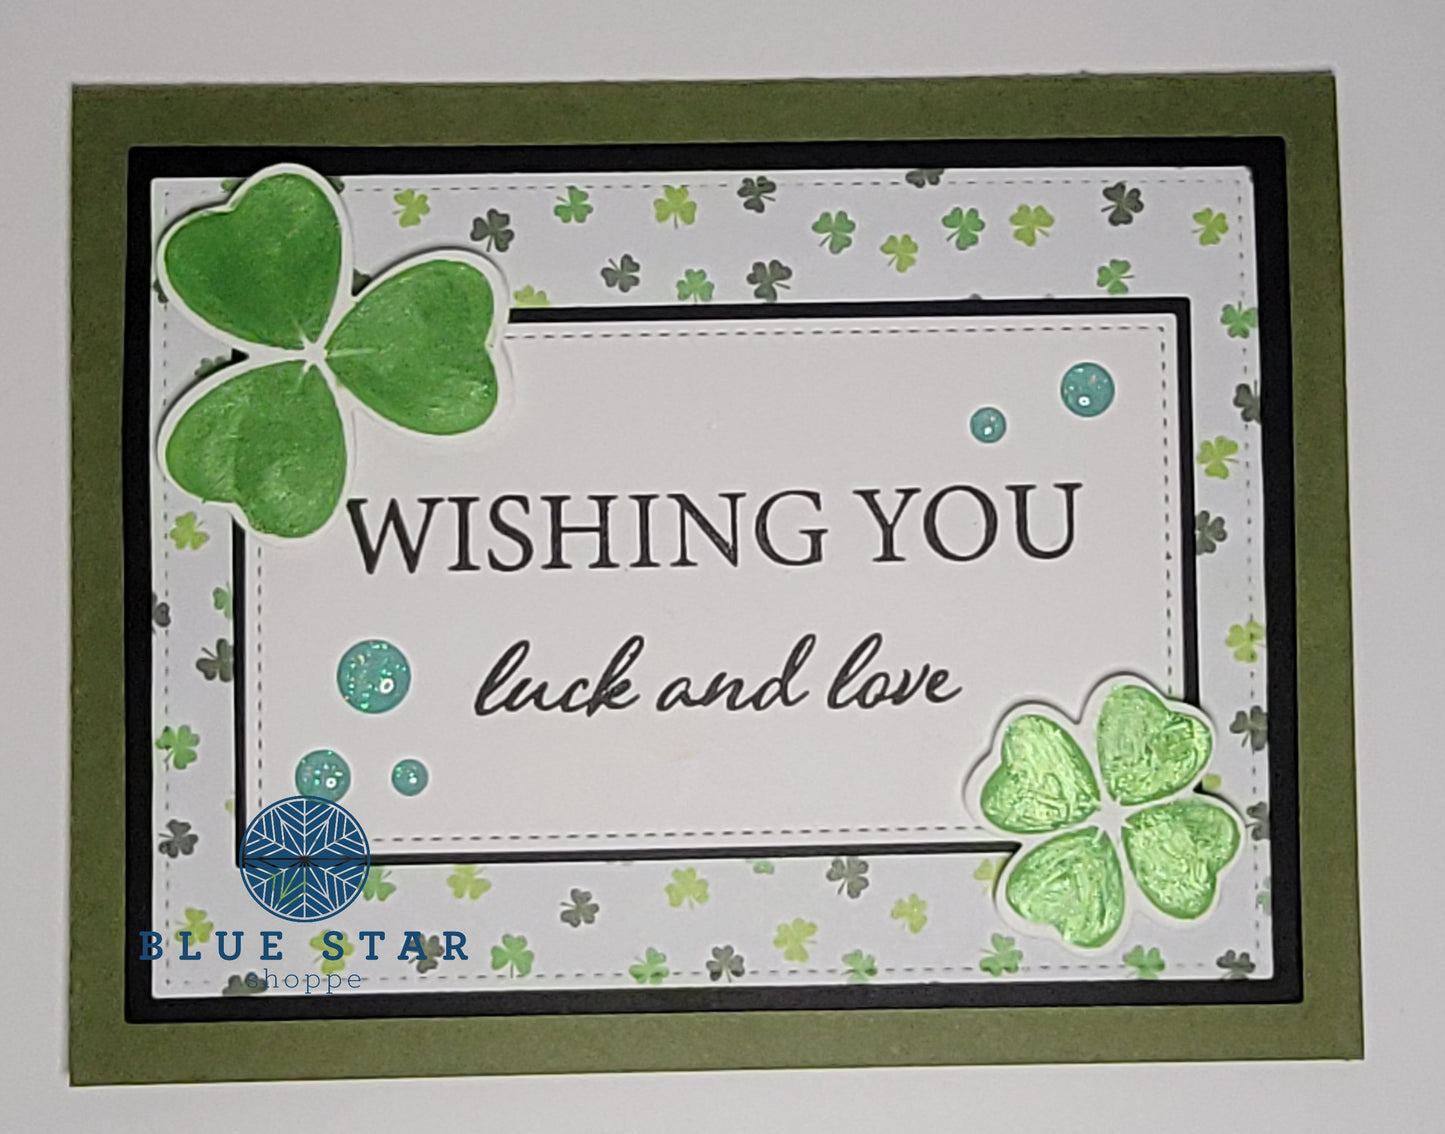 St. Patrick's Day - Wishing You Luck Greeting Cards